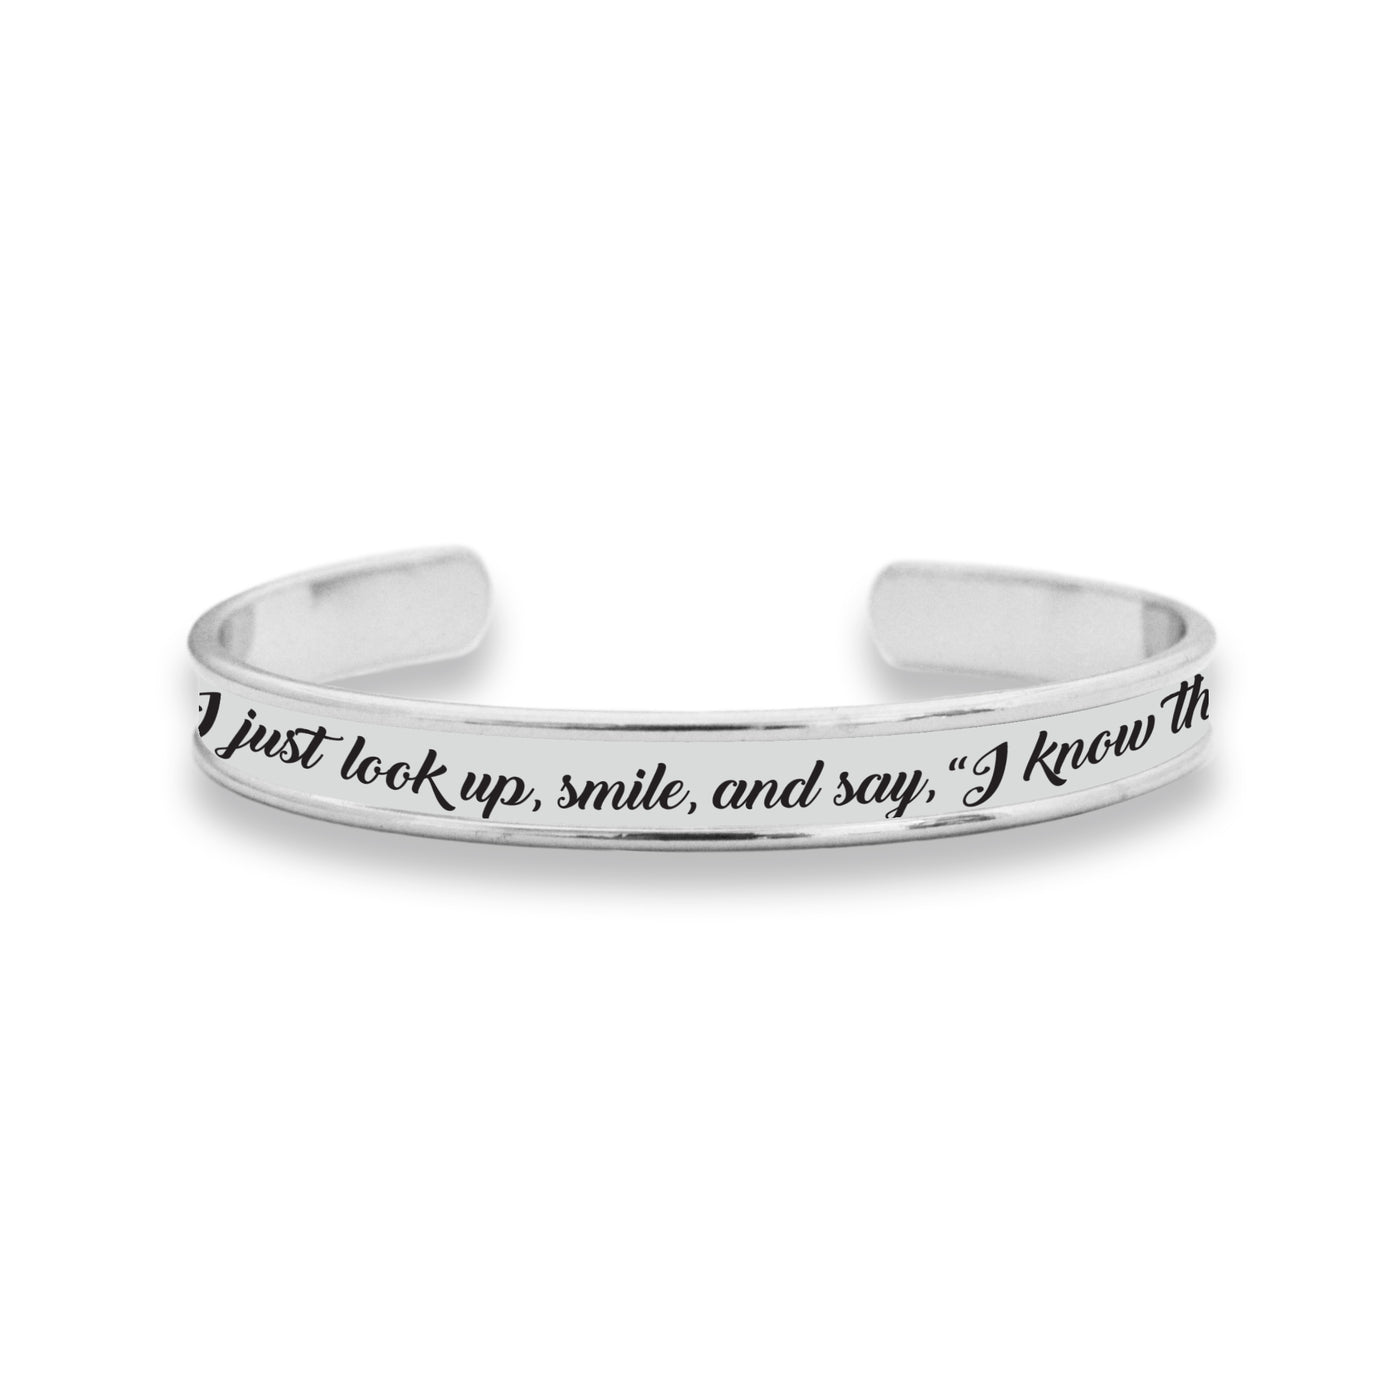 Know That Was You Cuff Bracelet